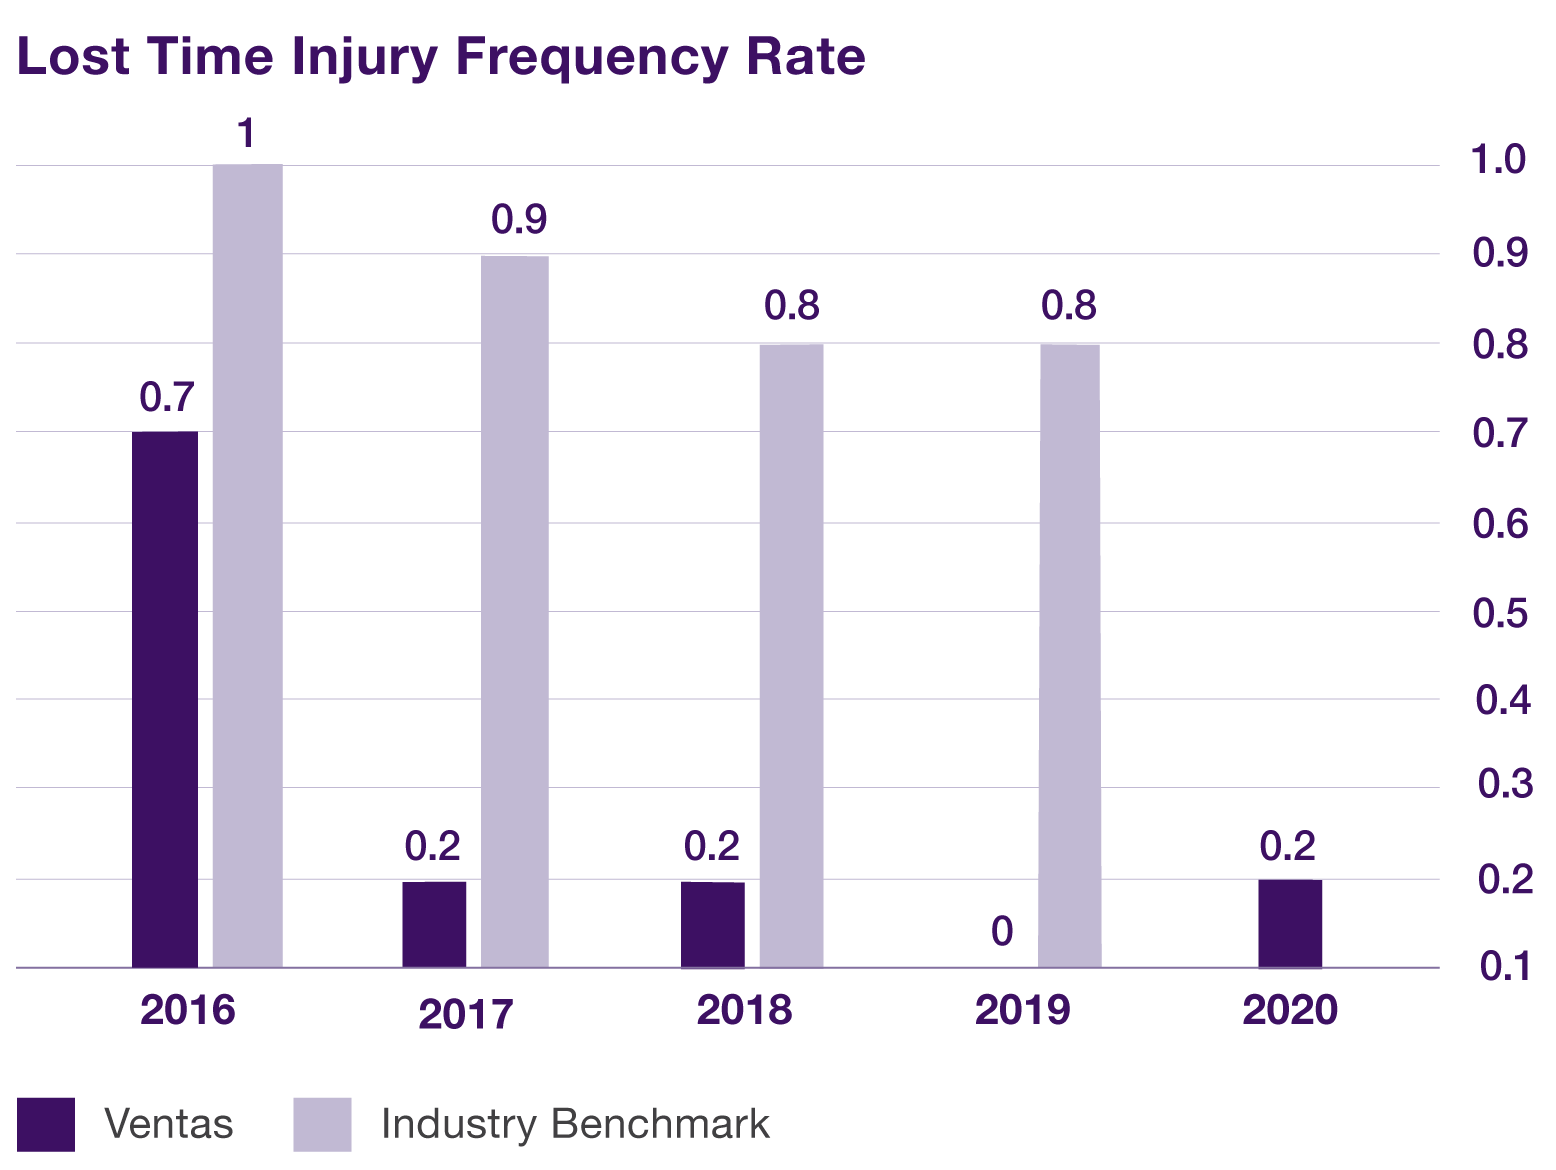 Lost time injury frequency rate